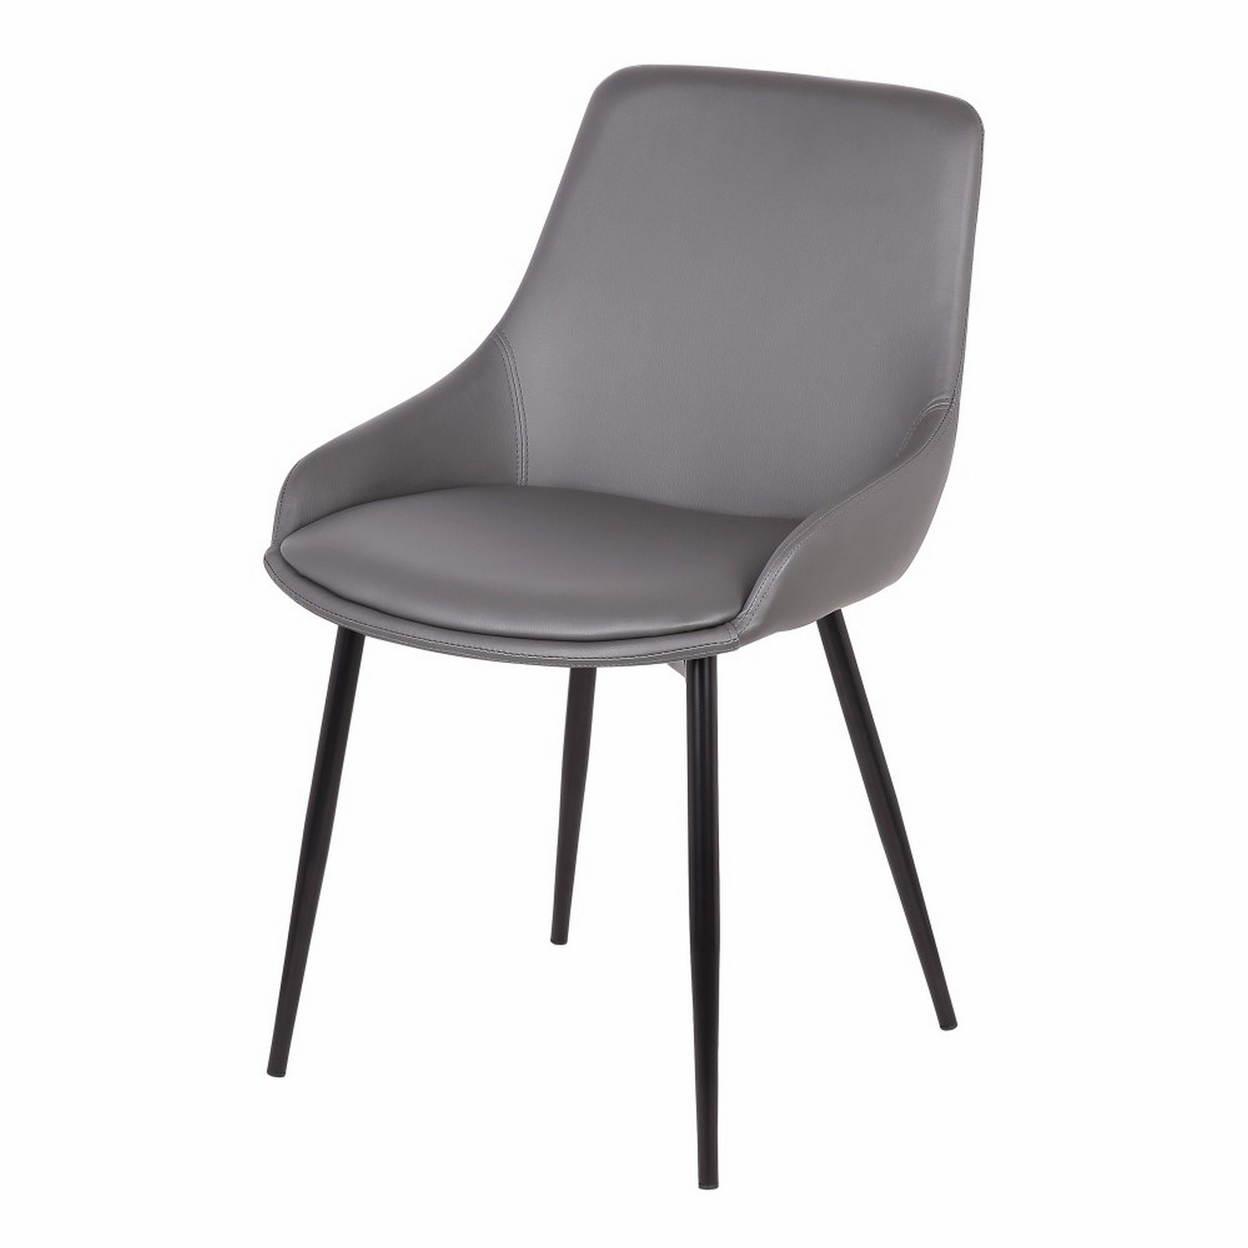 Leatherette Dining Chair With Bucket Seat And Metal Legs, Black And Gray- Saltoro Sherpi